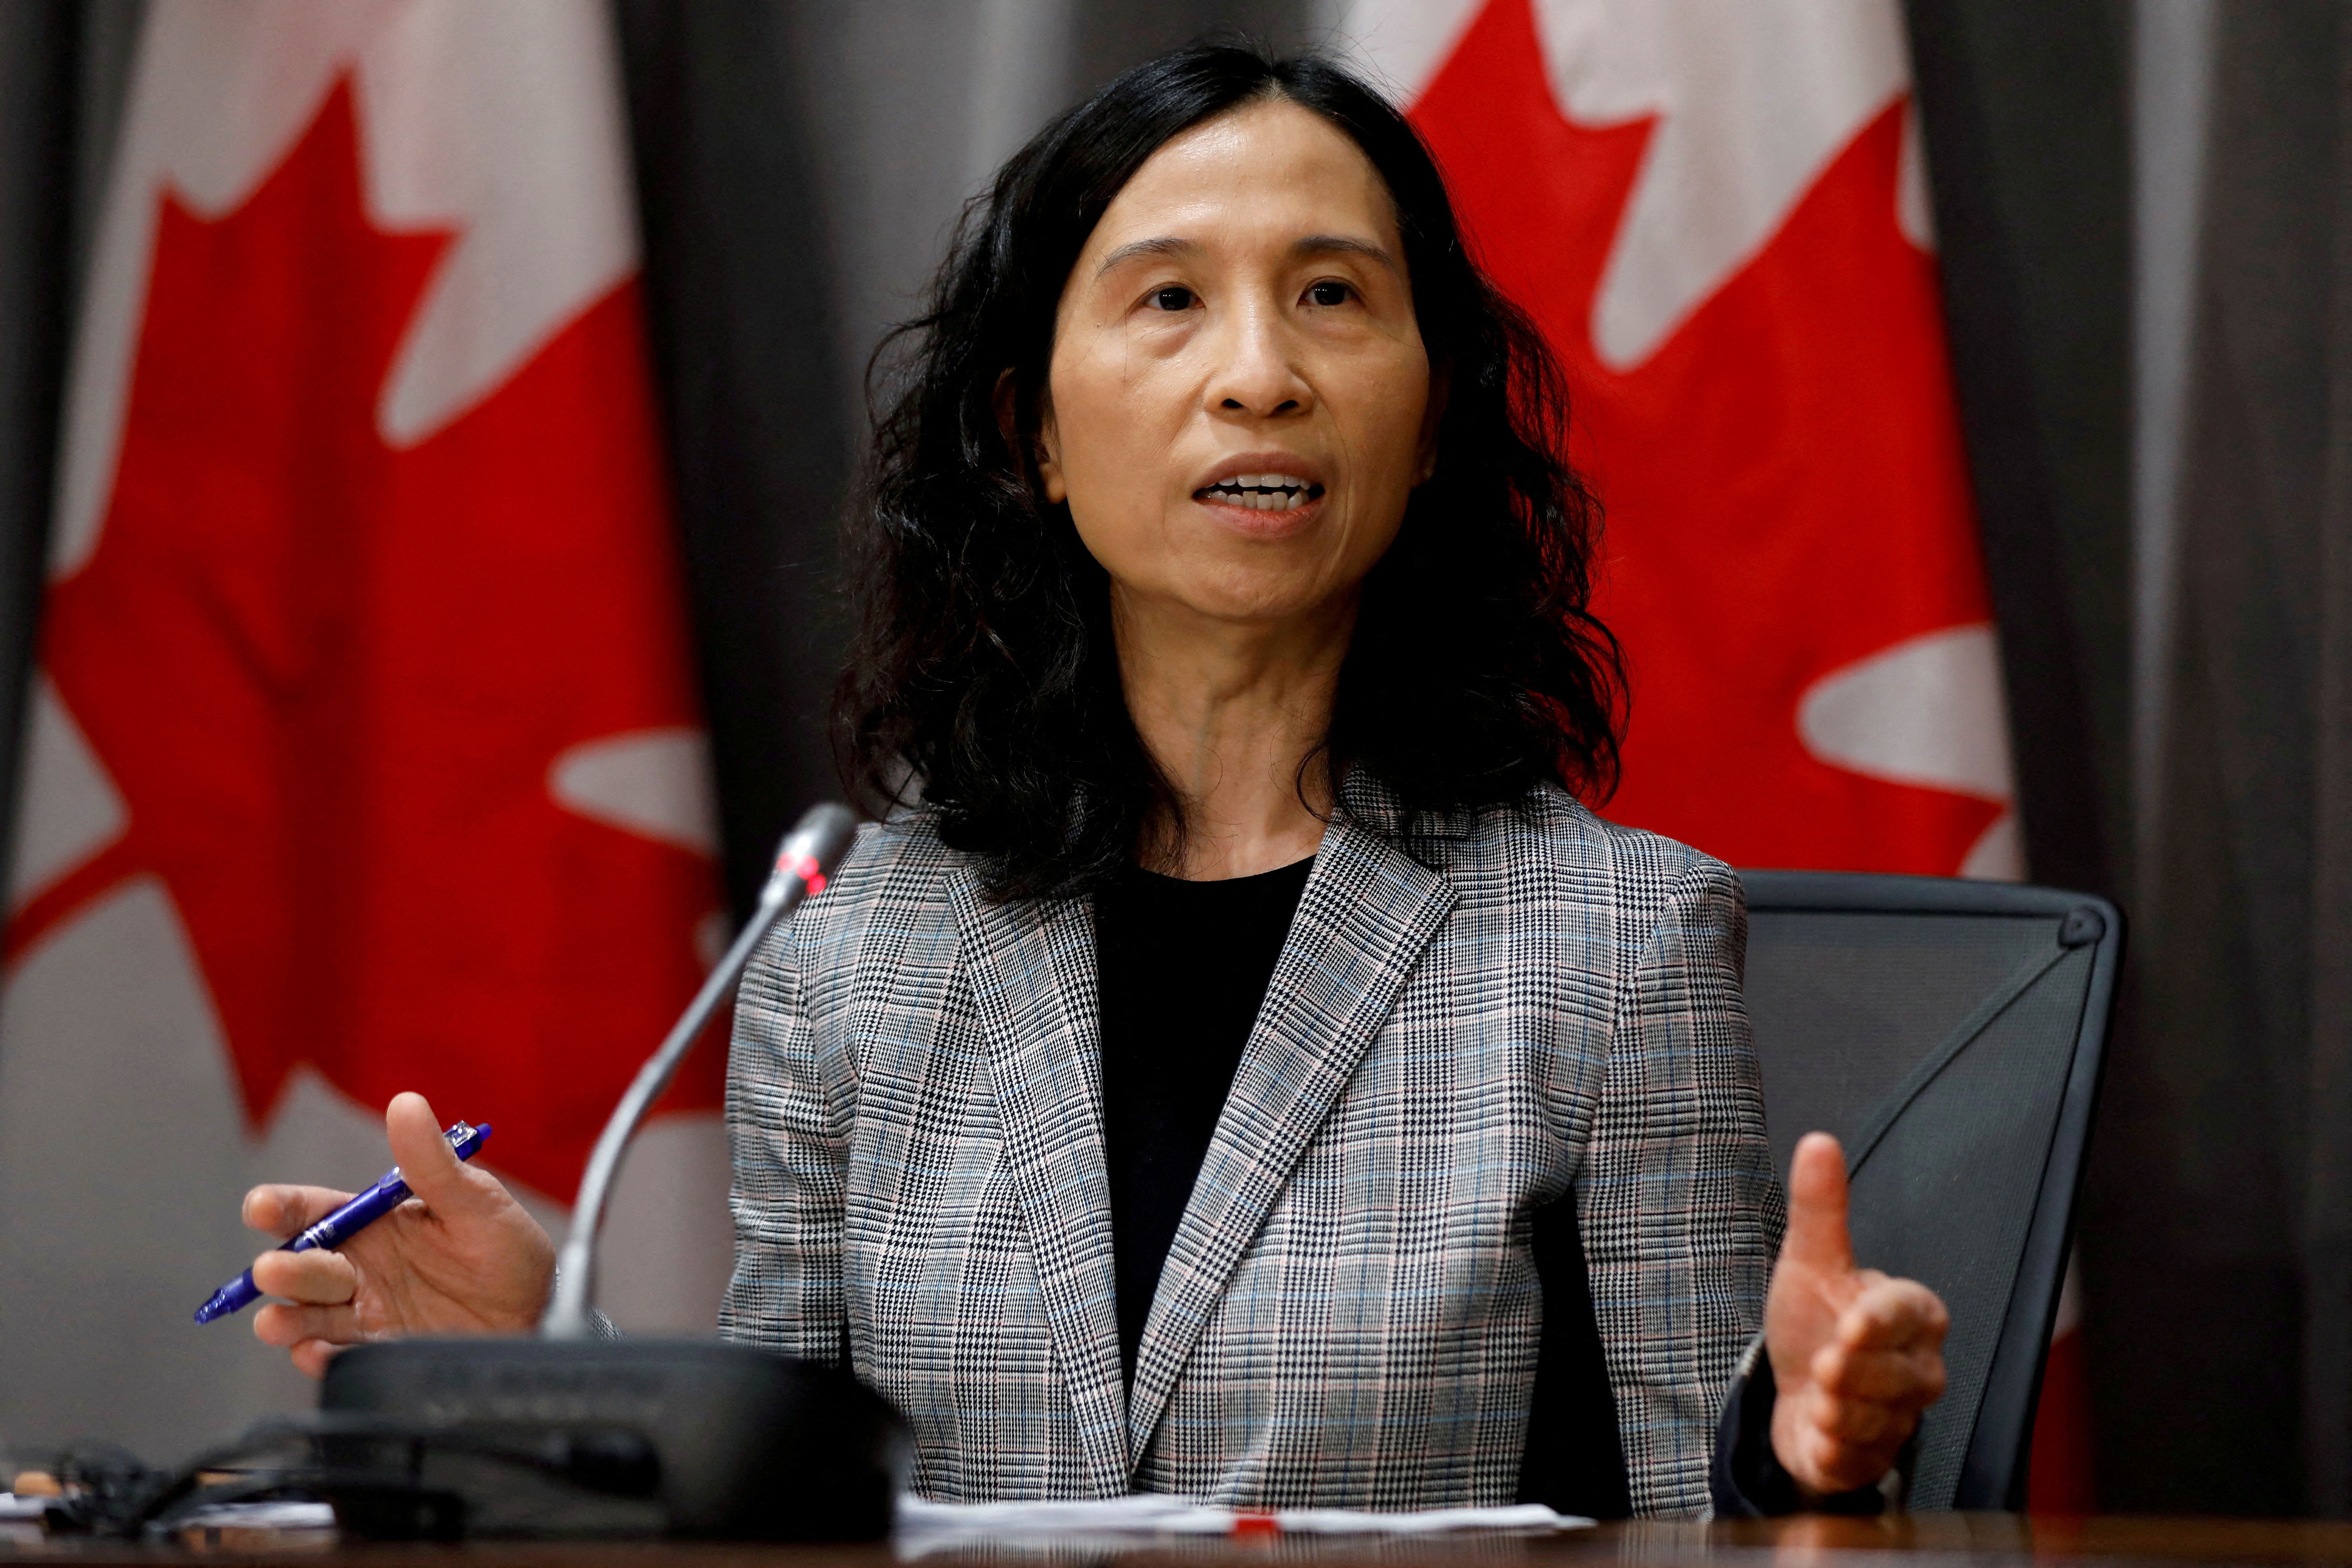 Canada's chief public health officer, Dr. Theresa Tam, attends a news conference as efforts continue to help slow the spread of coronavirus disease (COVID-19) in Ottawa